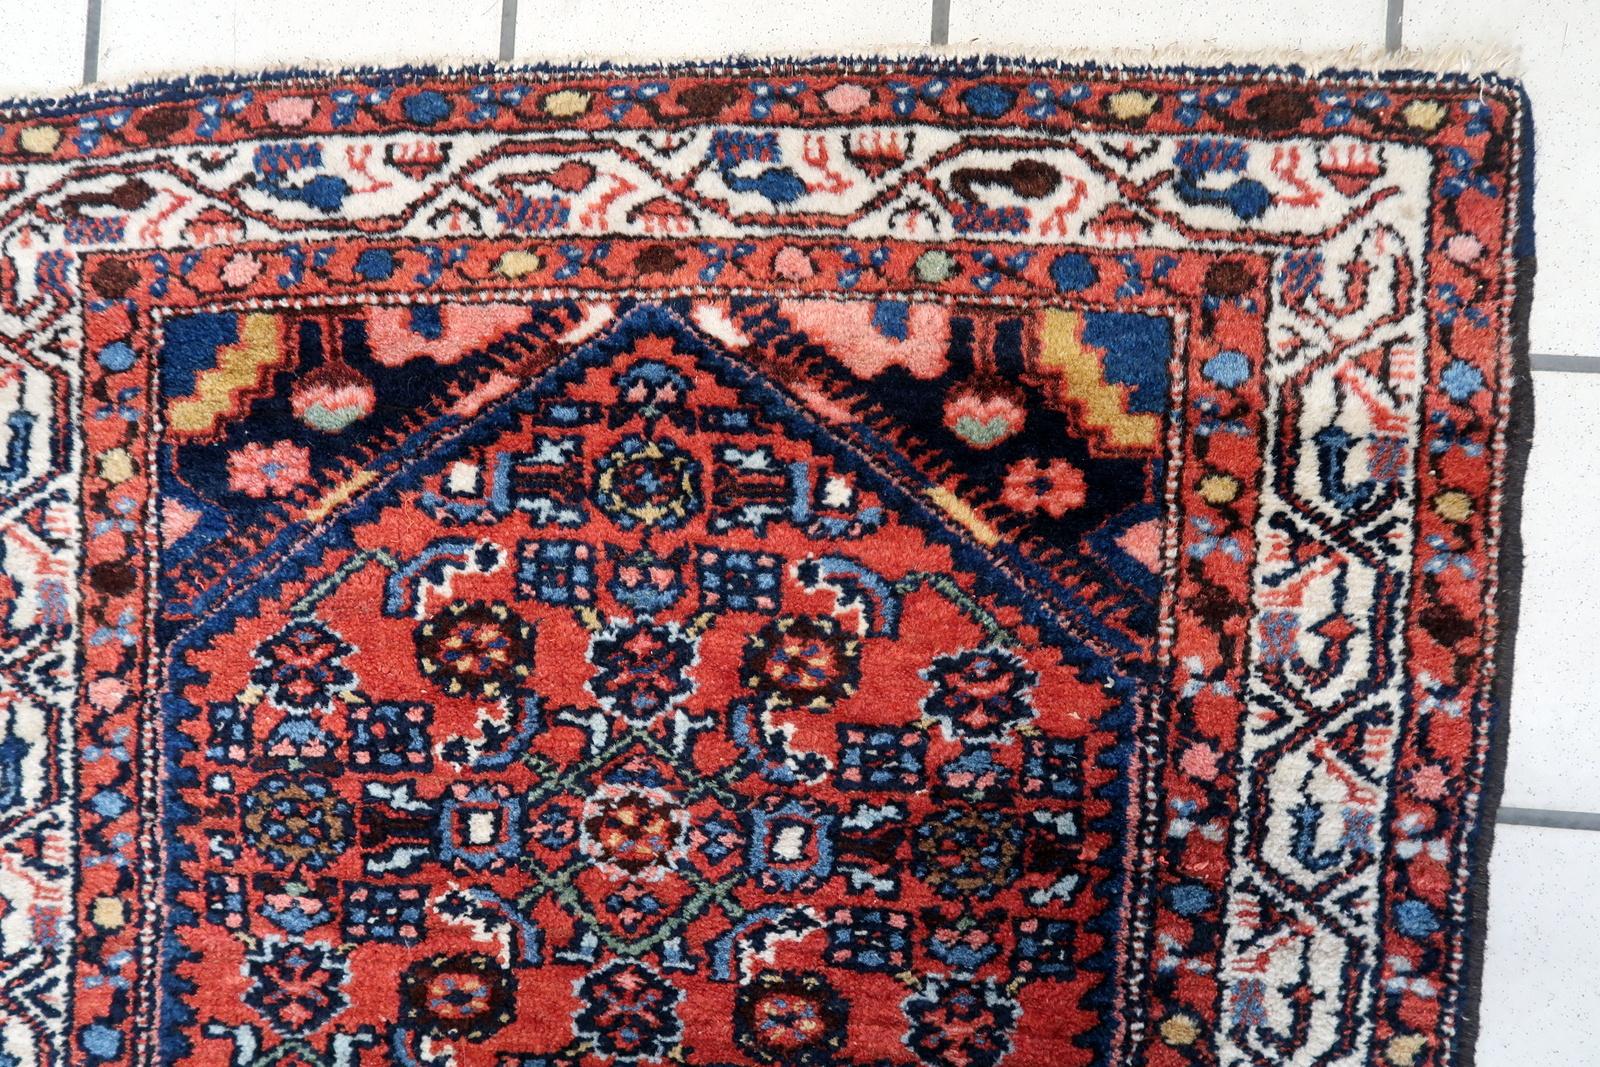 Handmade Vintage Persian Style Hamadan Rug:

Dimensions: This meticulously crafted rug measures 2.4’ x 4.1’ (76cm x 126cm), making it suitable for smaller spaces or as an accent piece.
Craftsmanship: Originating from the 1970s, this rug reflects the